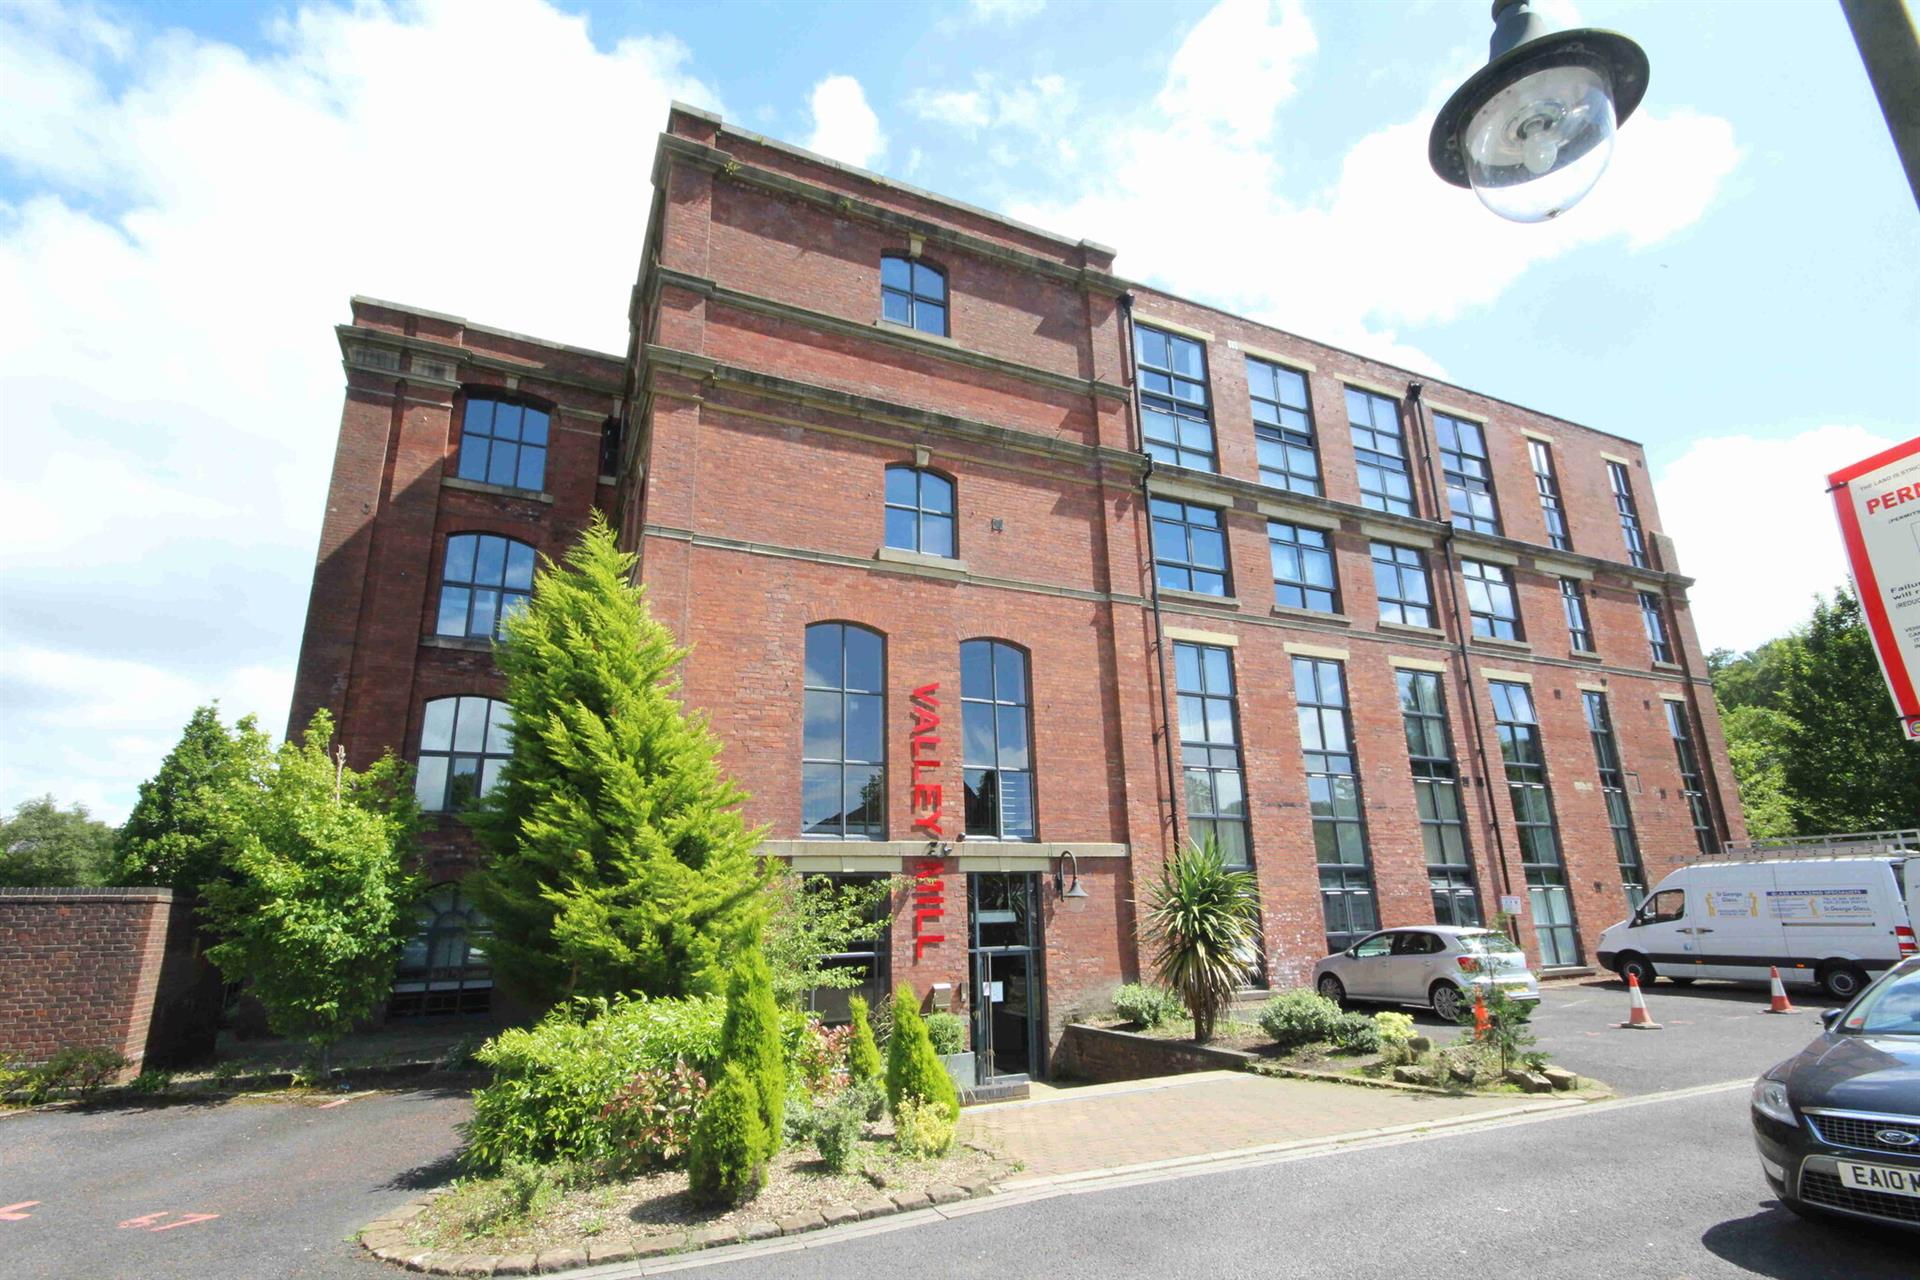 1 bedroom apartment flat / apartment To Let in Eagley, Bolton, ., . - Main photo.